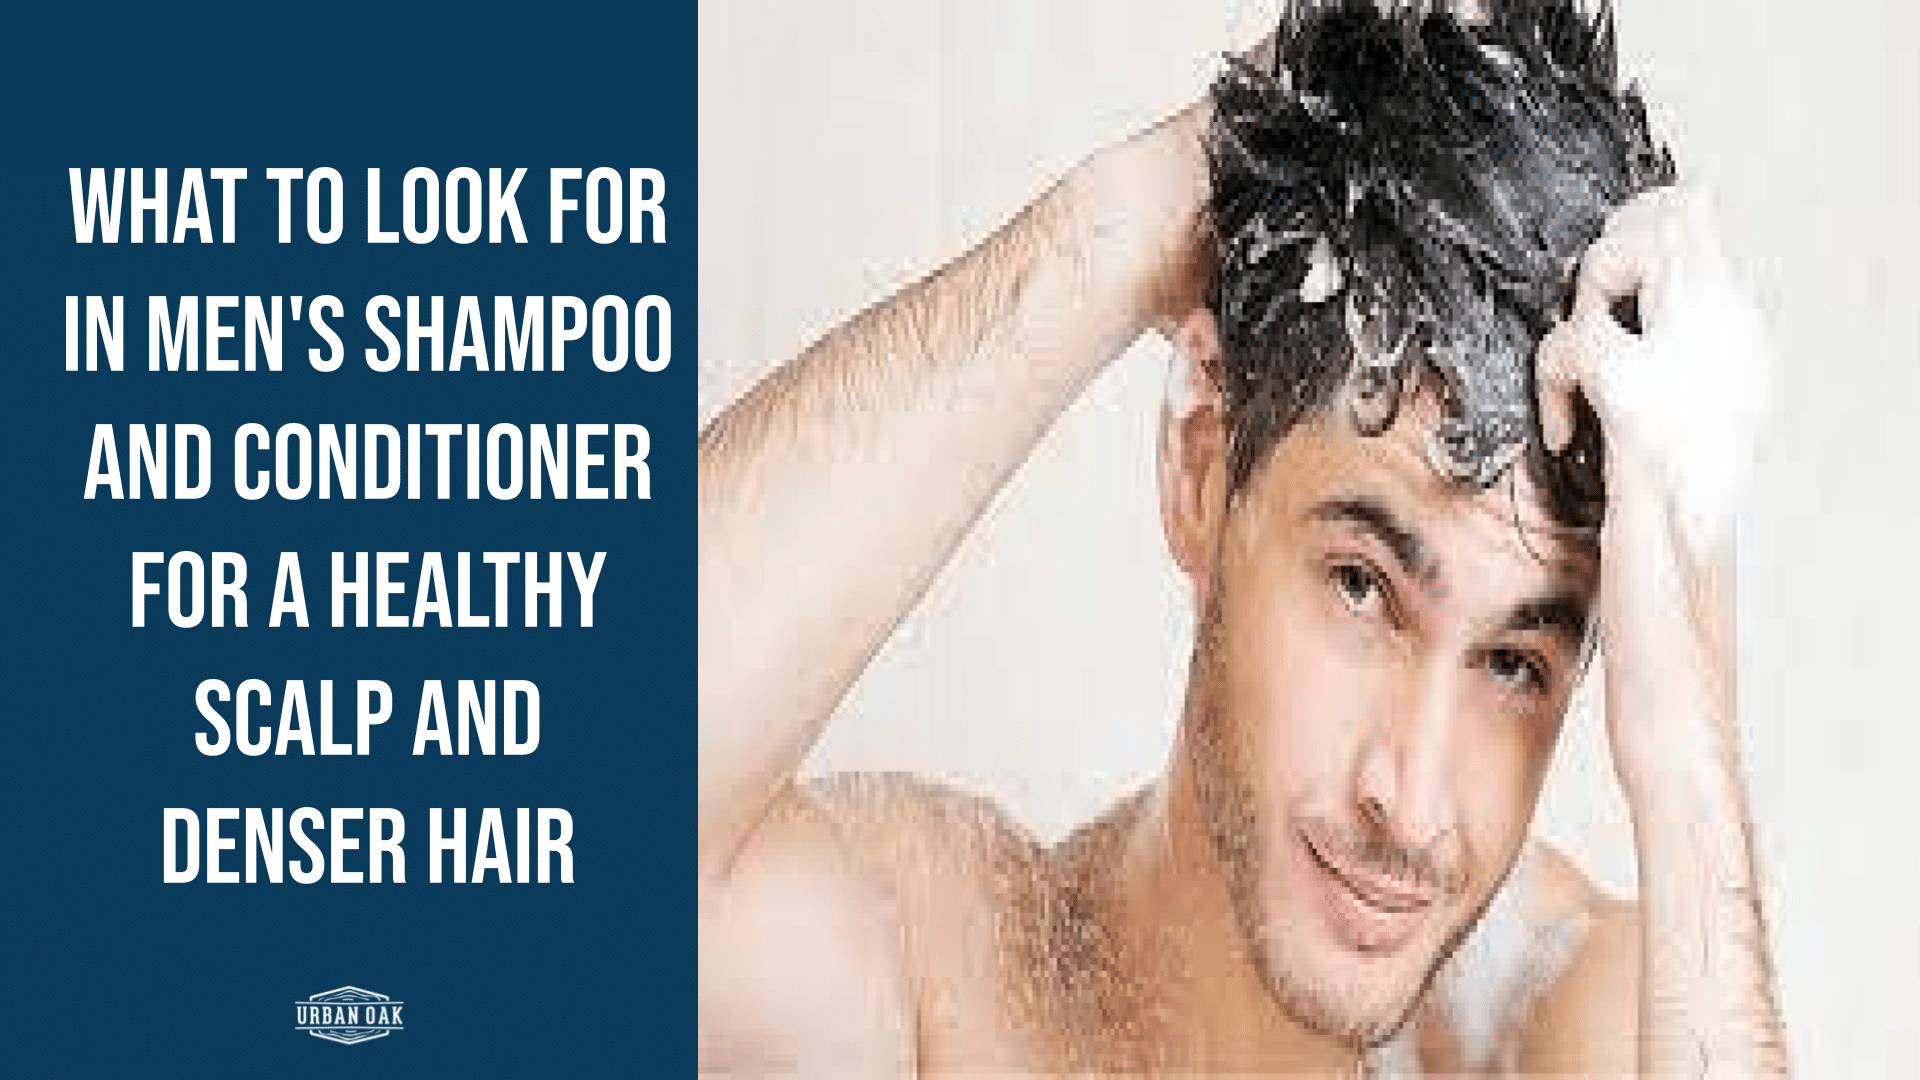 What To Look For In Men's Shampoo And Conditioner For A Healthy Scalp And Denser Hair